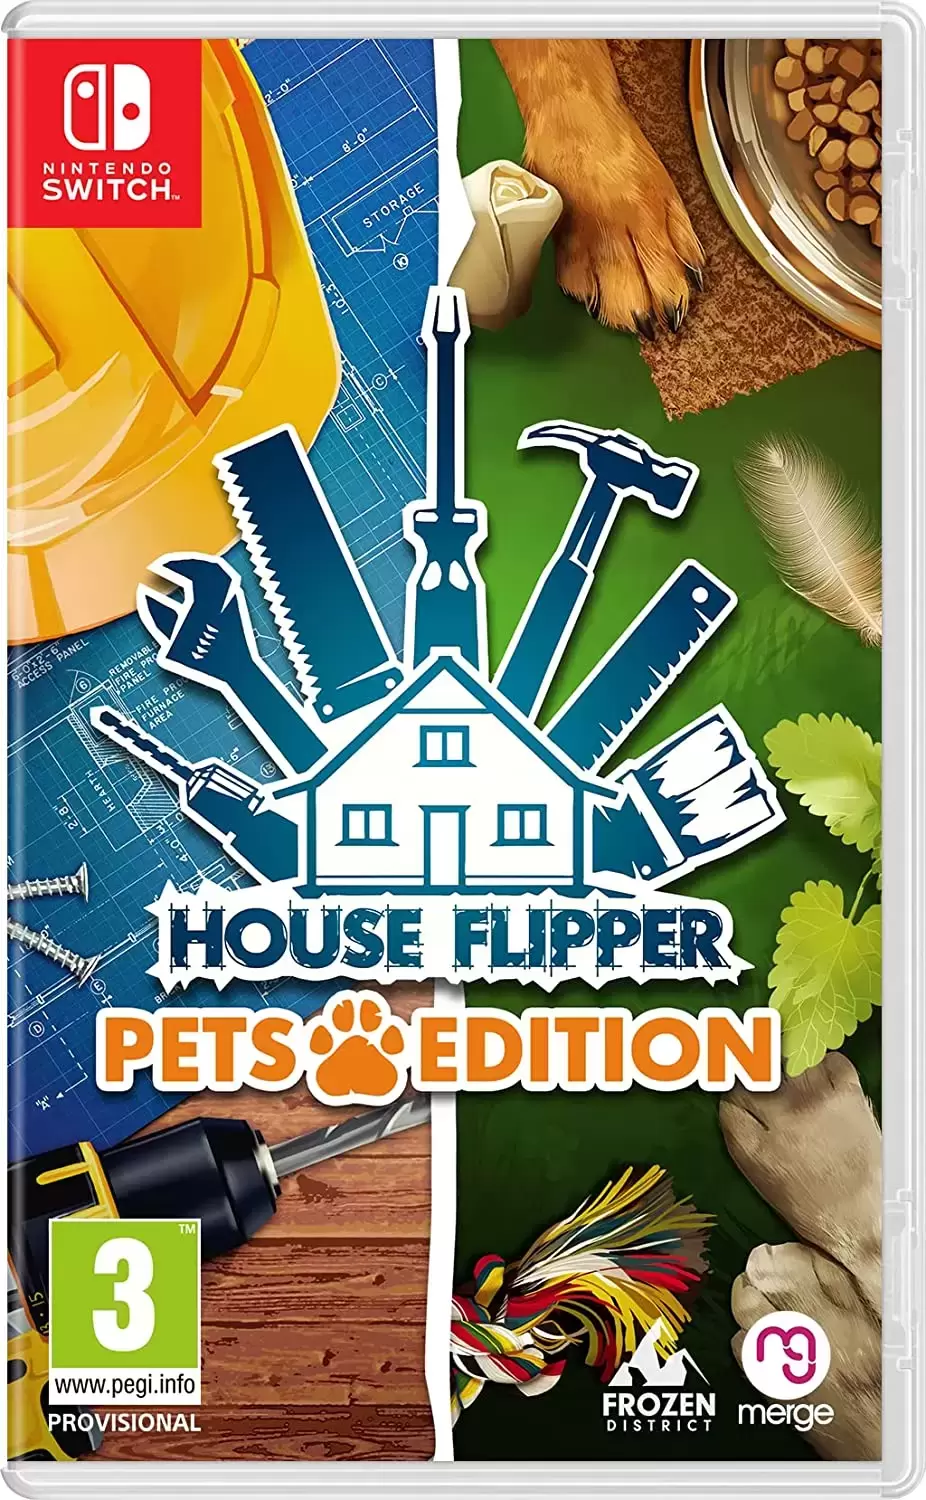 Nintendo Switch Games - House Flipper Pets Edition